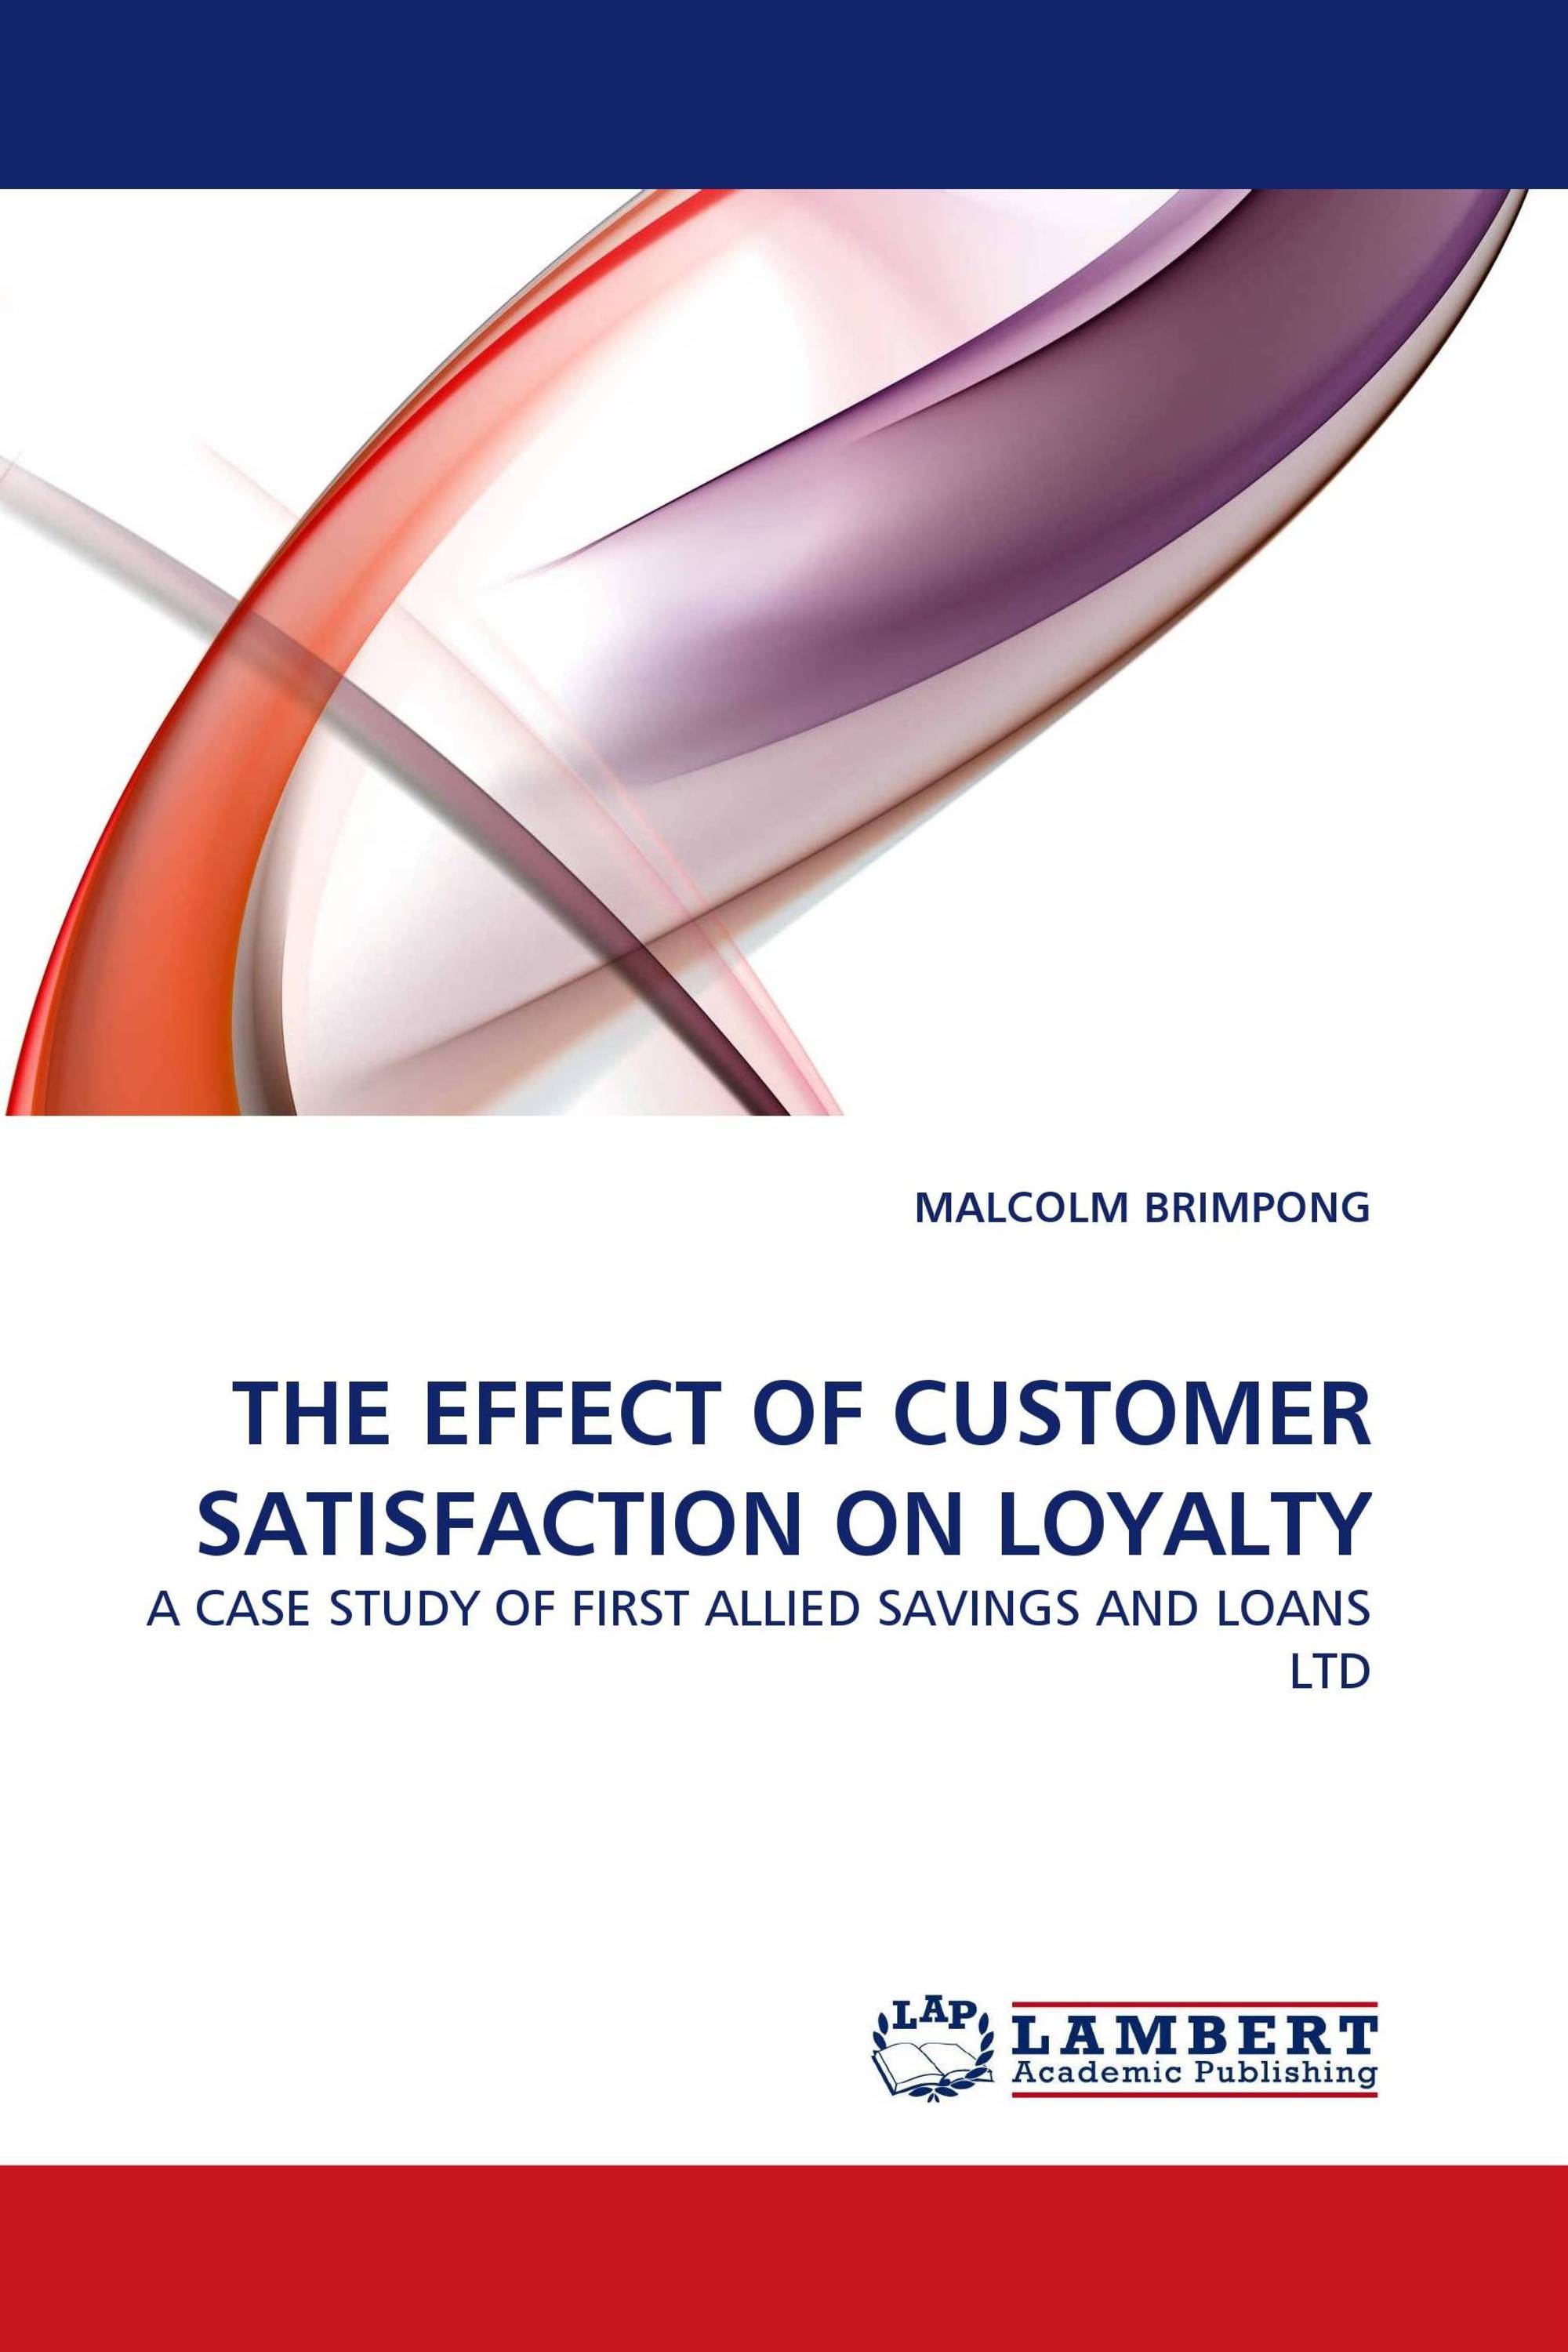 THE EFFECT OF CUSTOMER SATISFACTION ON LOYALTY